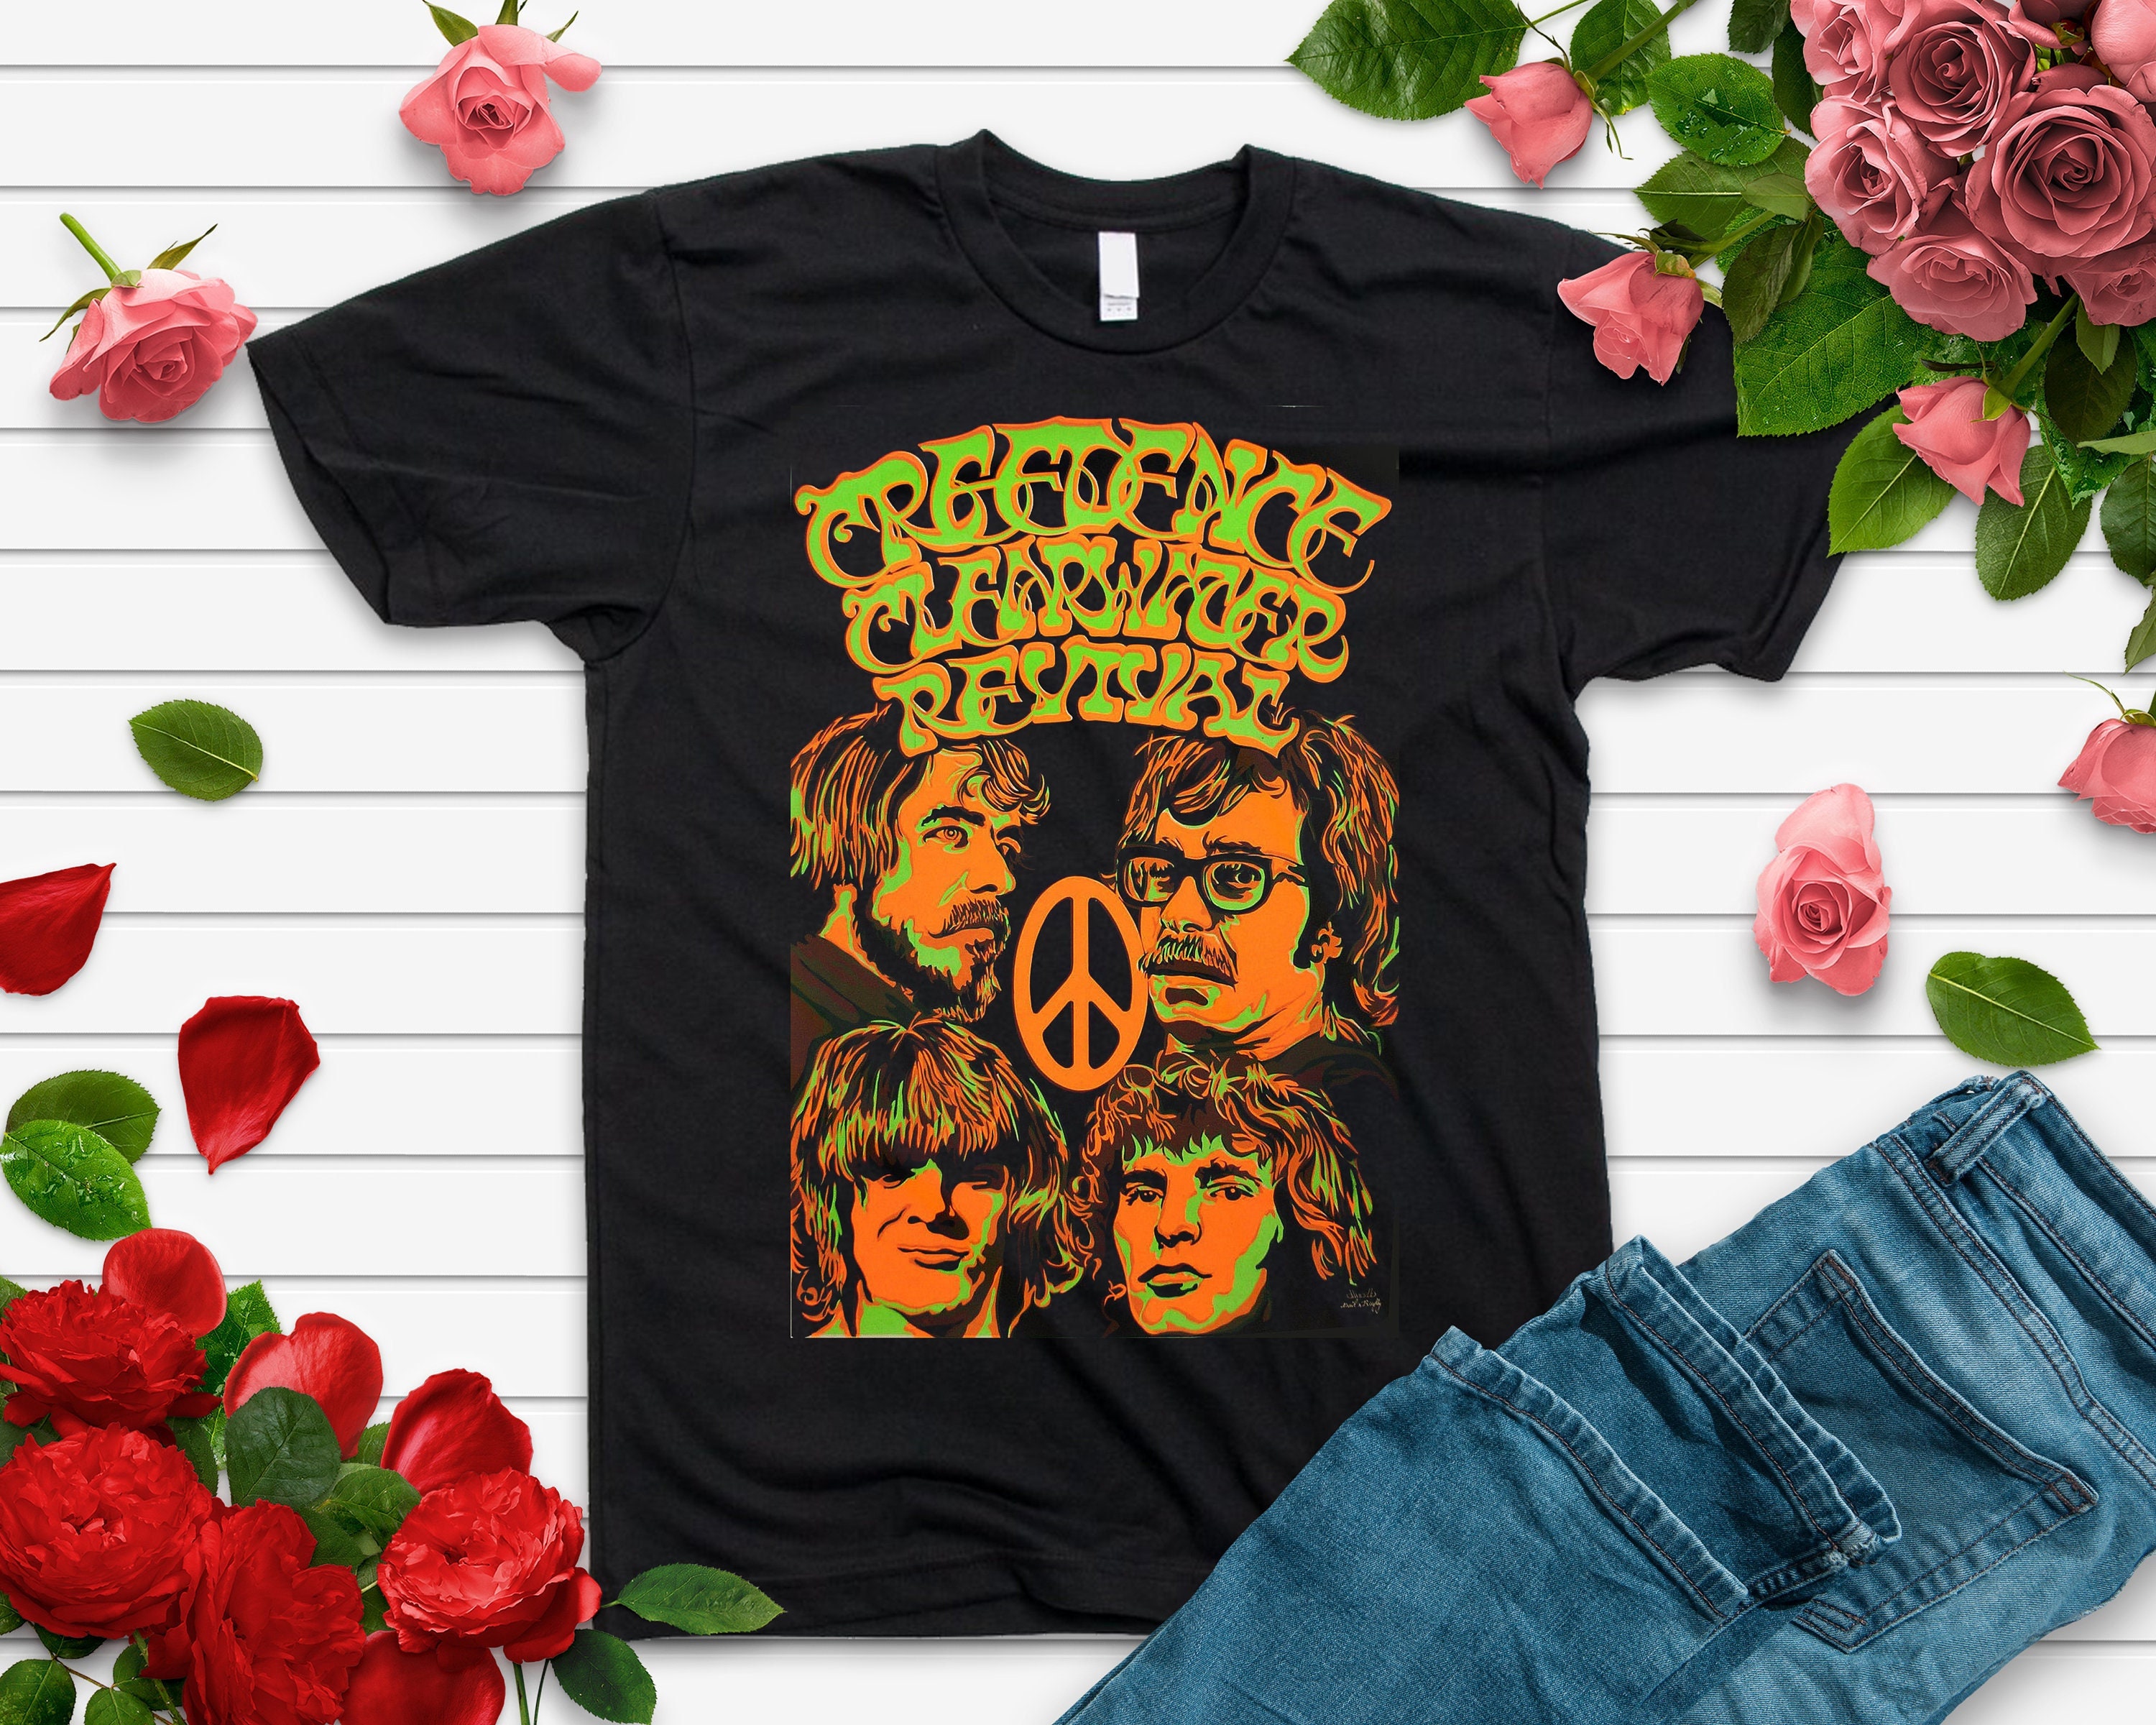 Creedence Clearwater Revival T-Shirt, Green River Creedence Clearwater Revival Rock and Roll